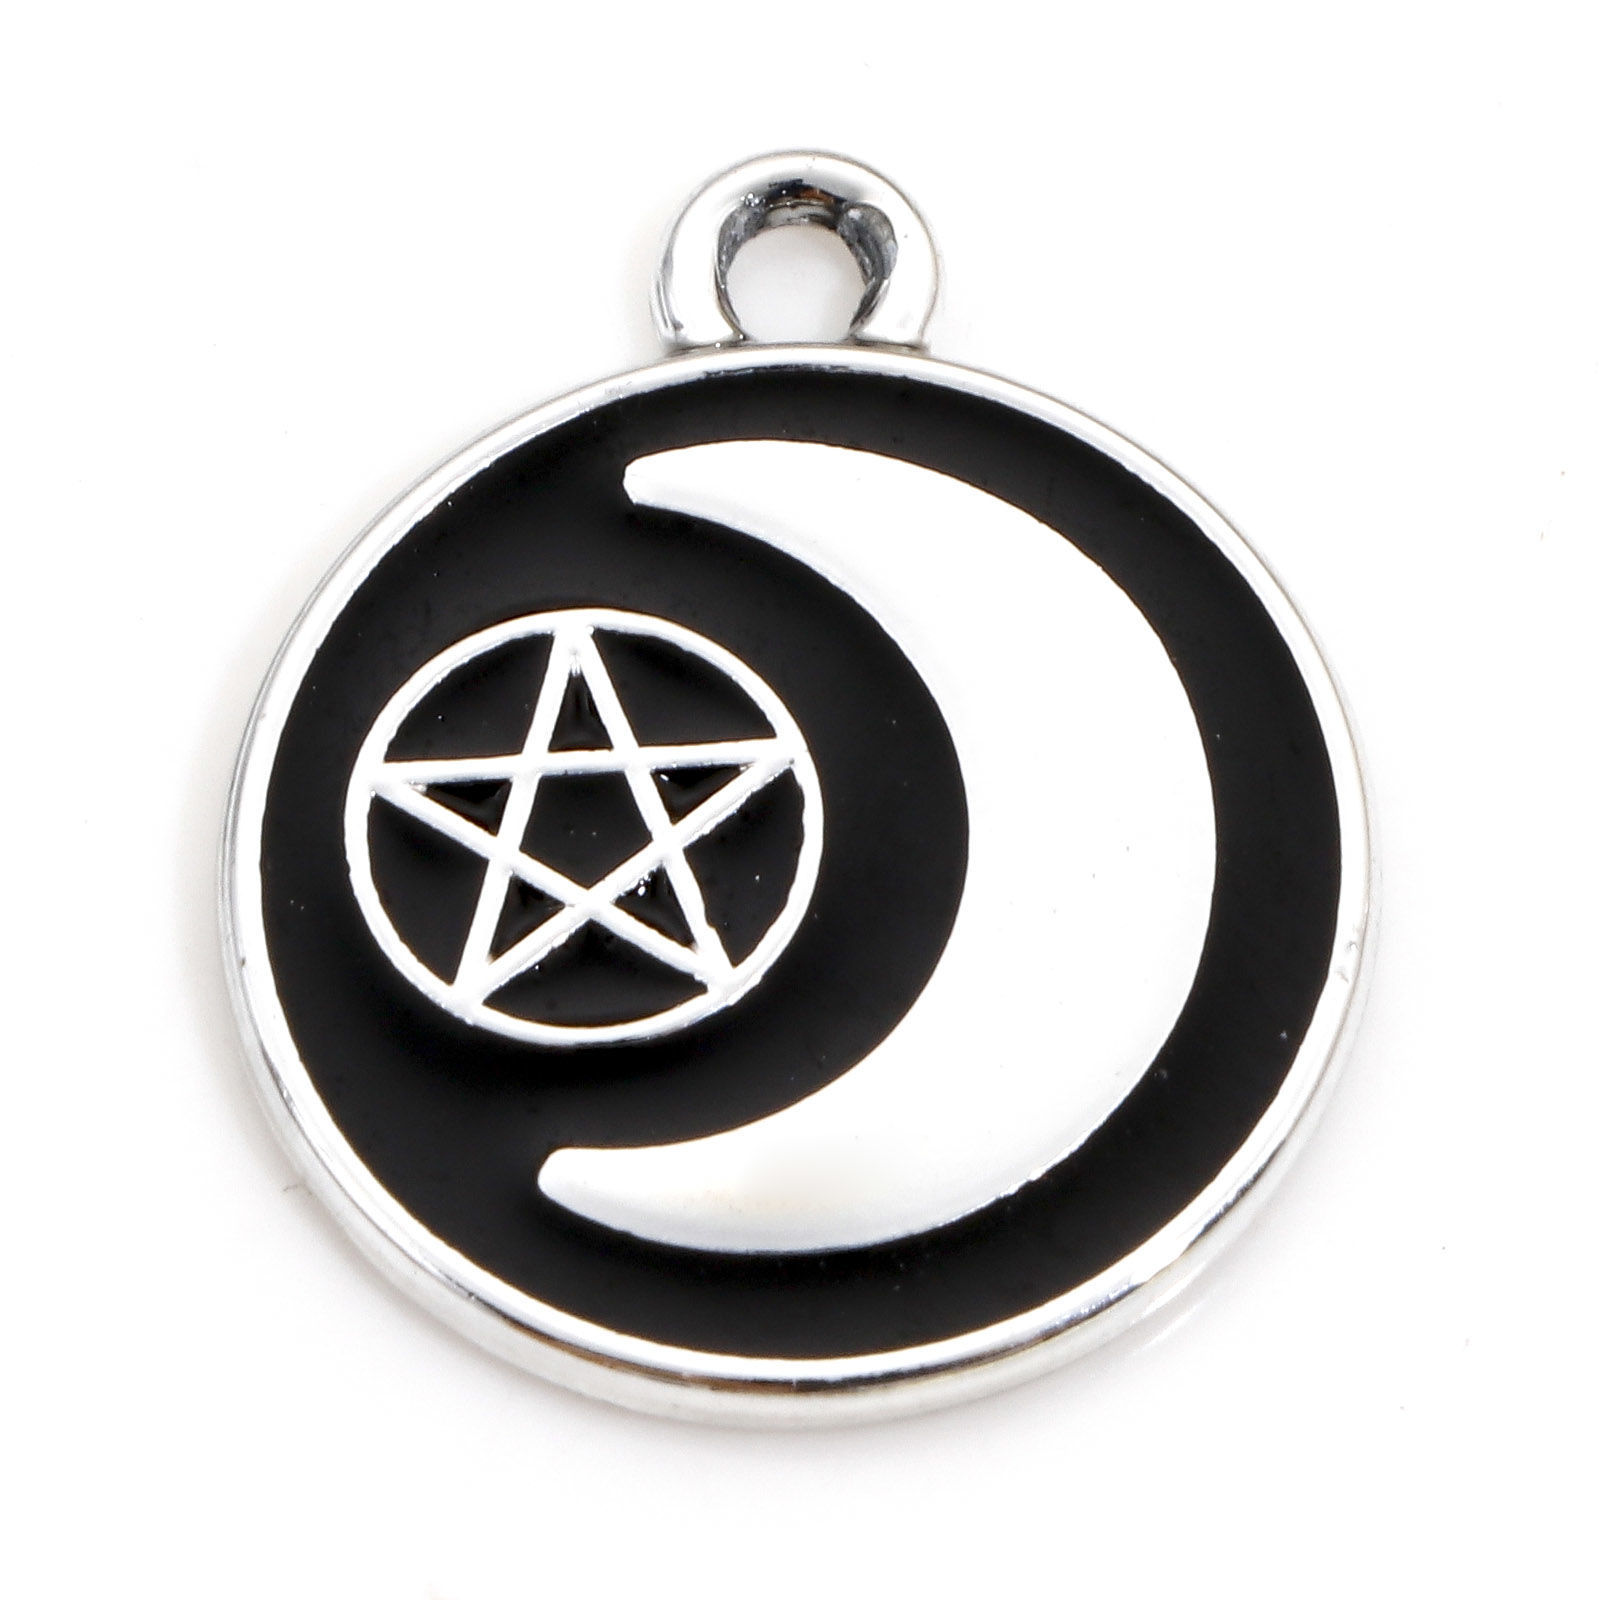 Picture of Zinc Based Alloy Halloween Charms Silver Tone Black Round Pentagram Star Enamel 20mm x 17mm, 10 PCs